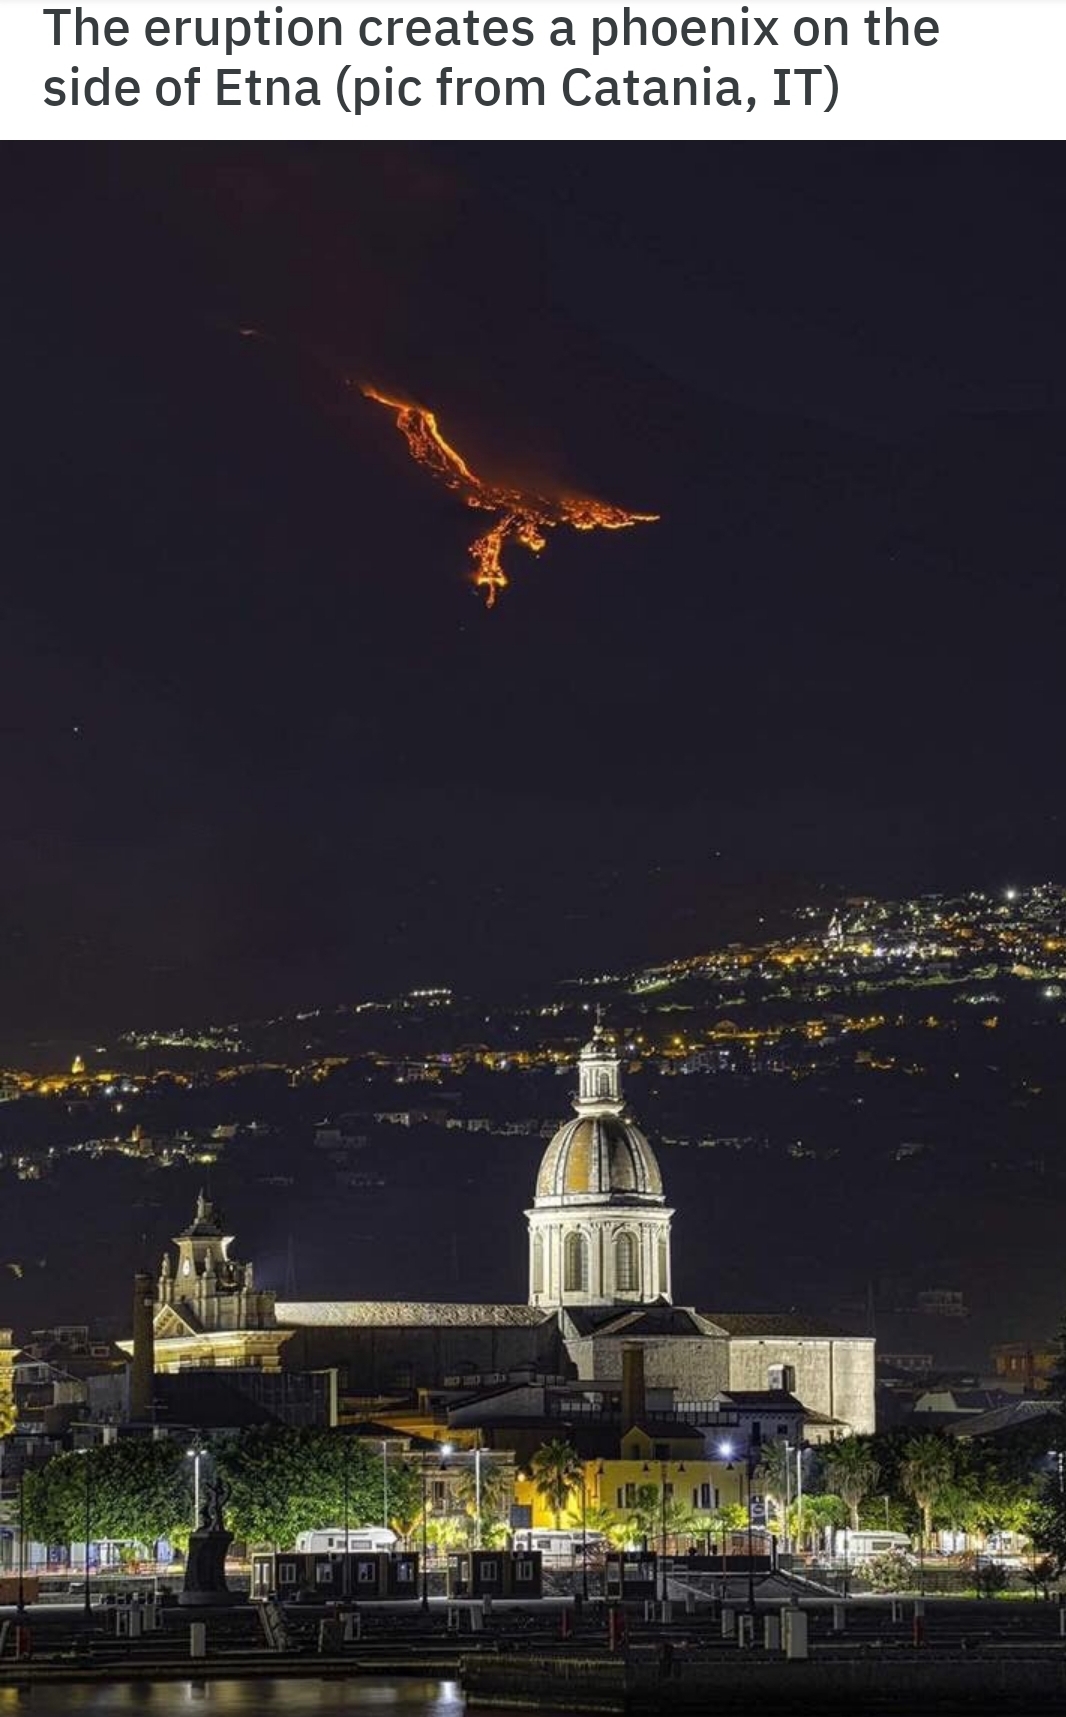 sky - The eruption creates a phoenix on the side of Etna pic from Catania, It